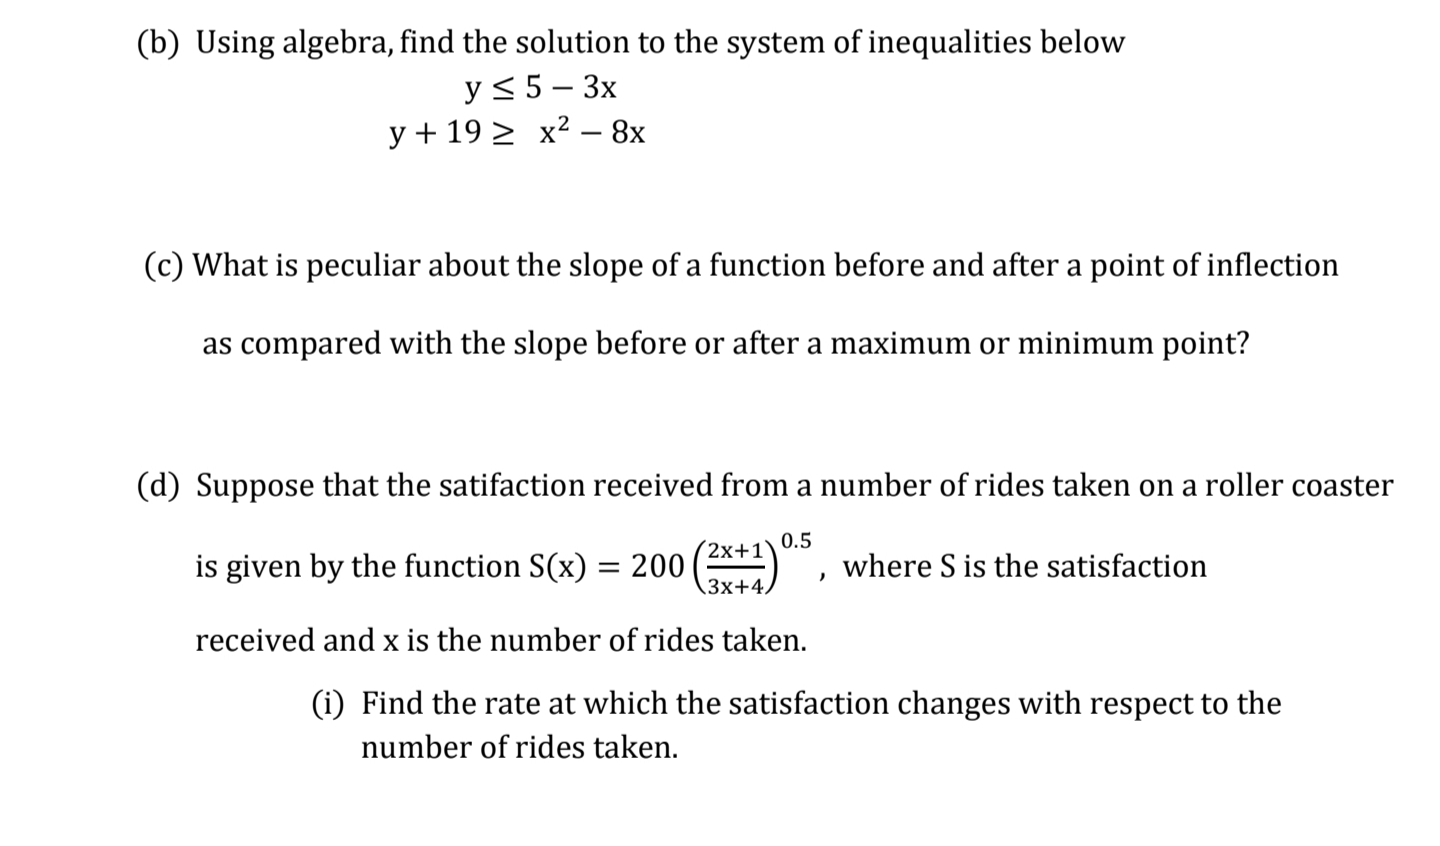 (b) Using algebra, find the solution to the system of inequalities below
y<5– 3x
y + 19 > x² – 8x
